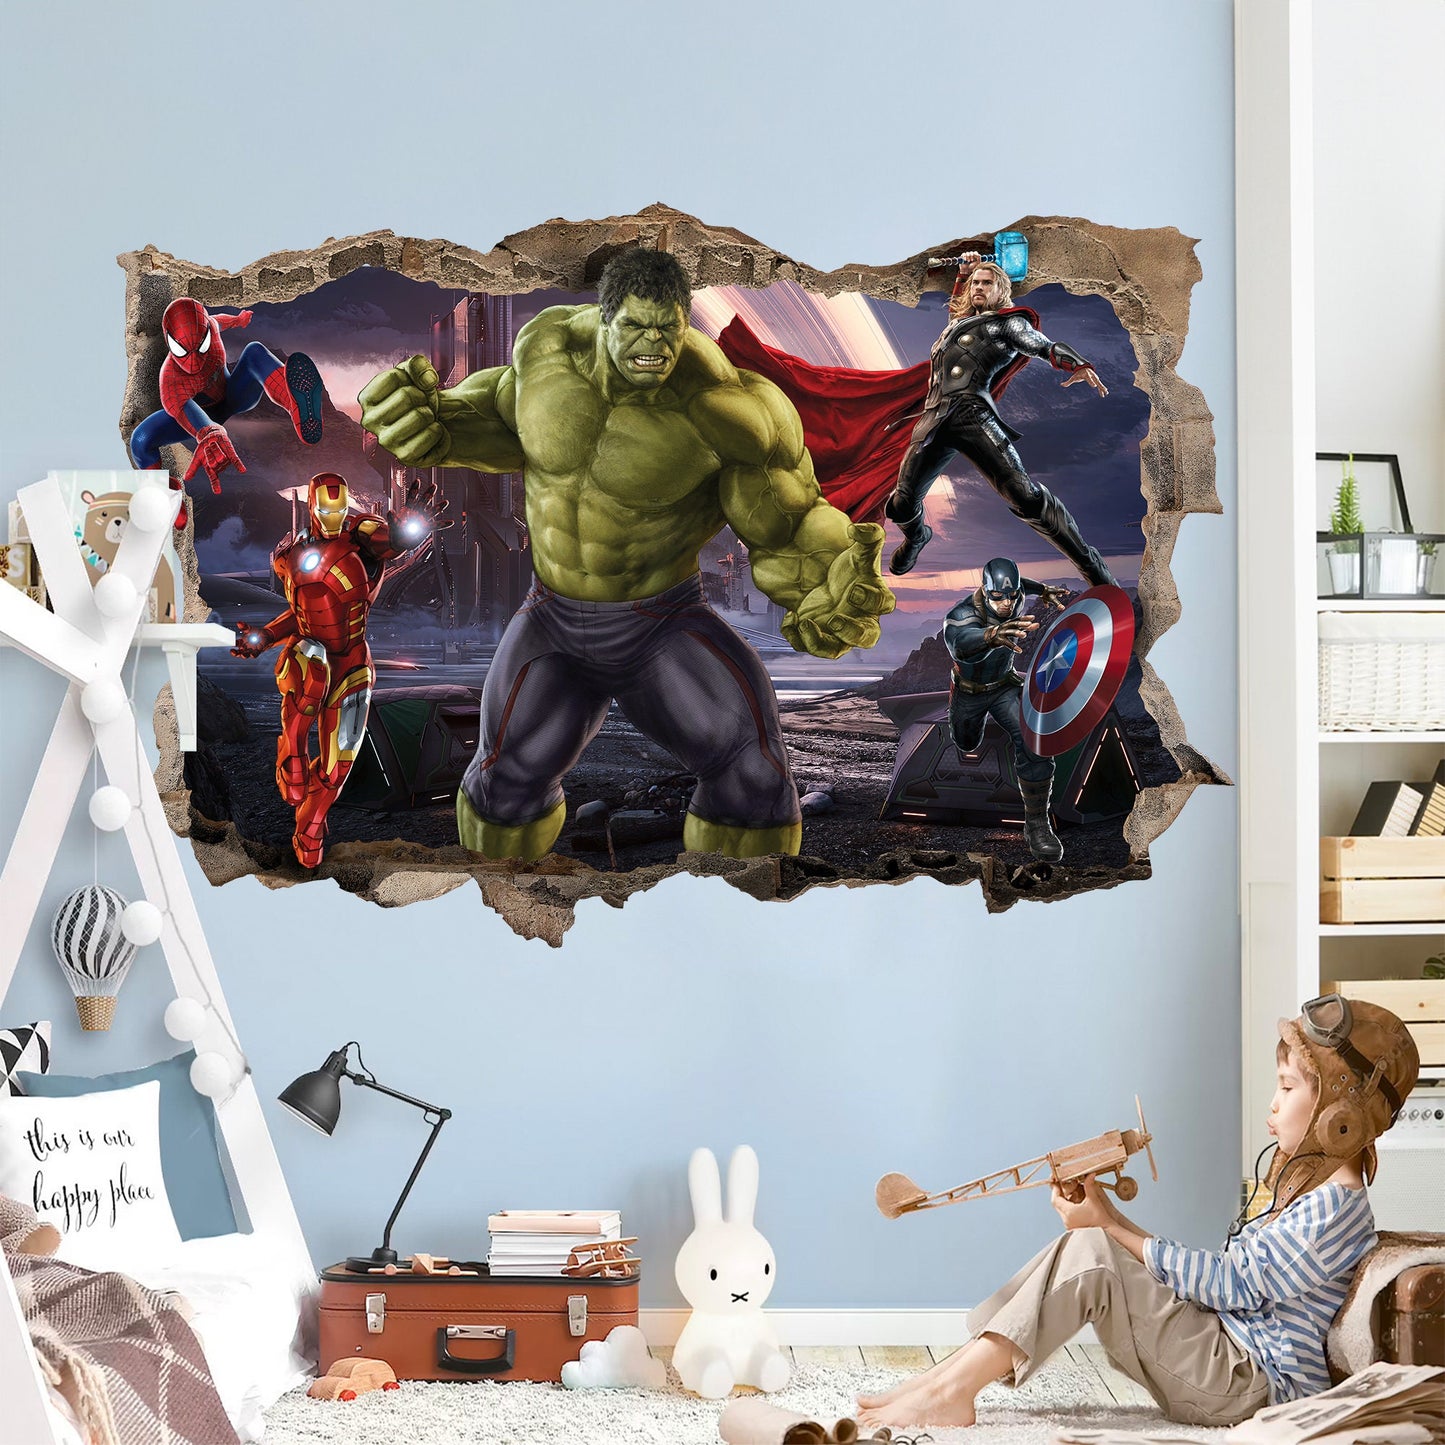 Avengers Superhero Wall Decal Avengers Assemble: Dynamic 3D Stickers - Removable Peel and Stick - SP013